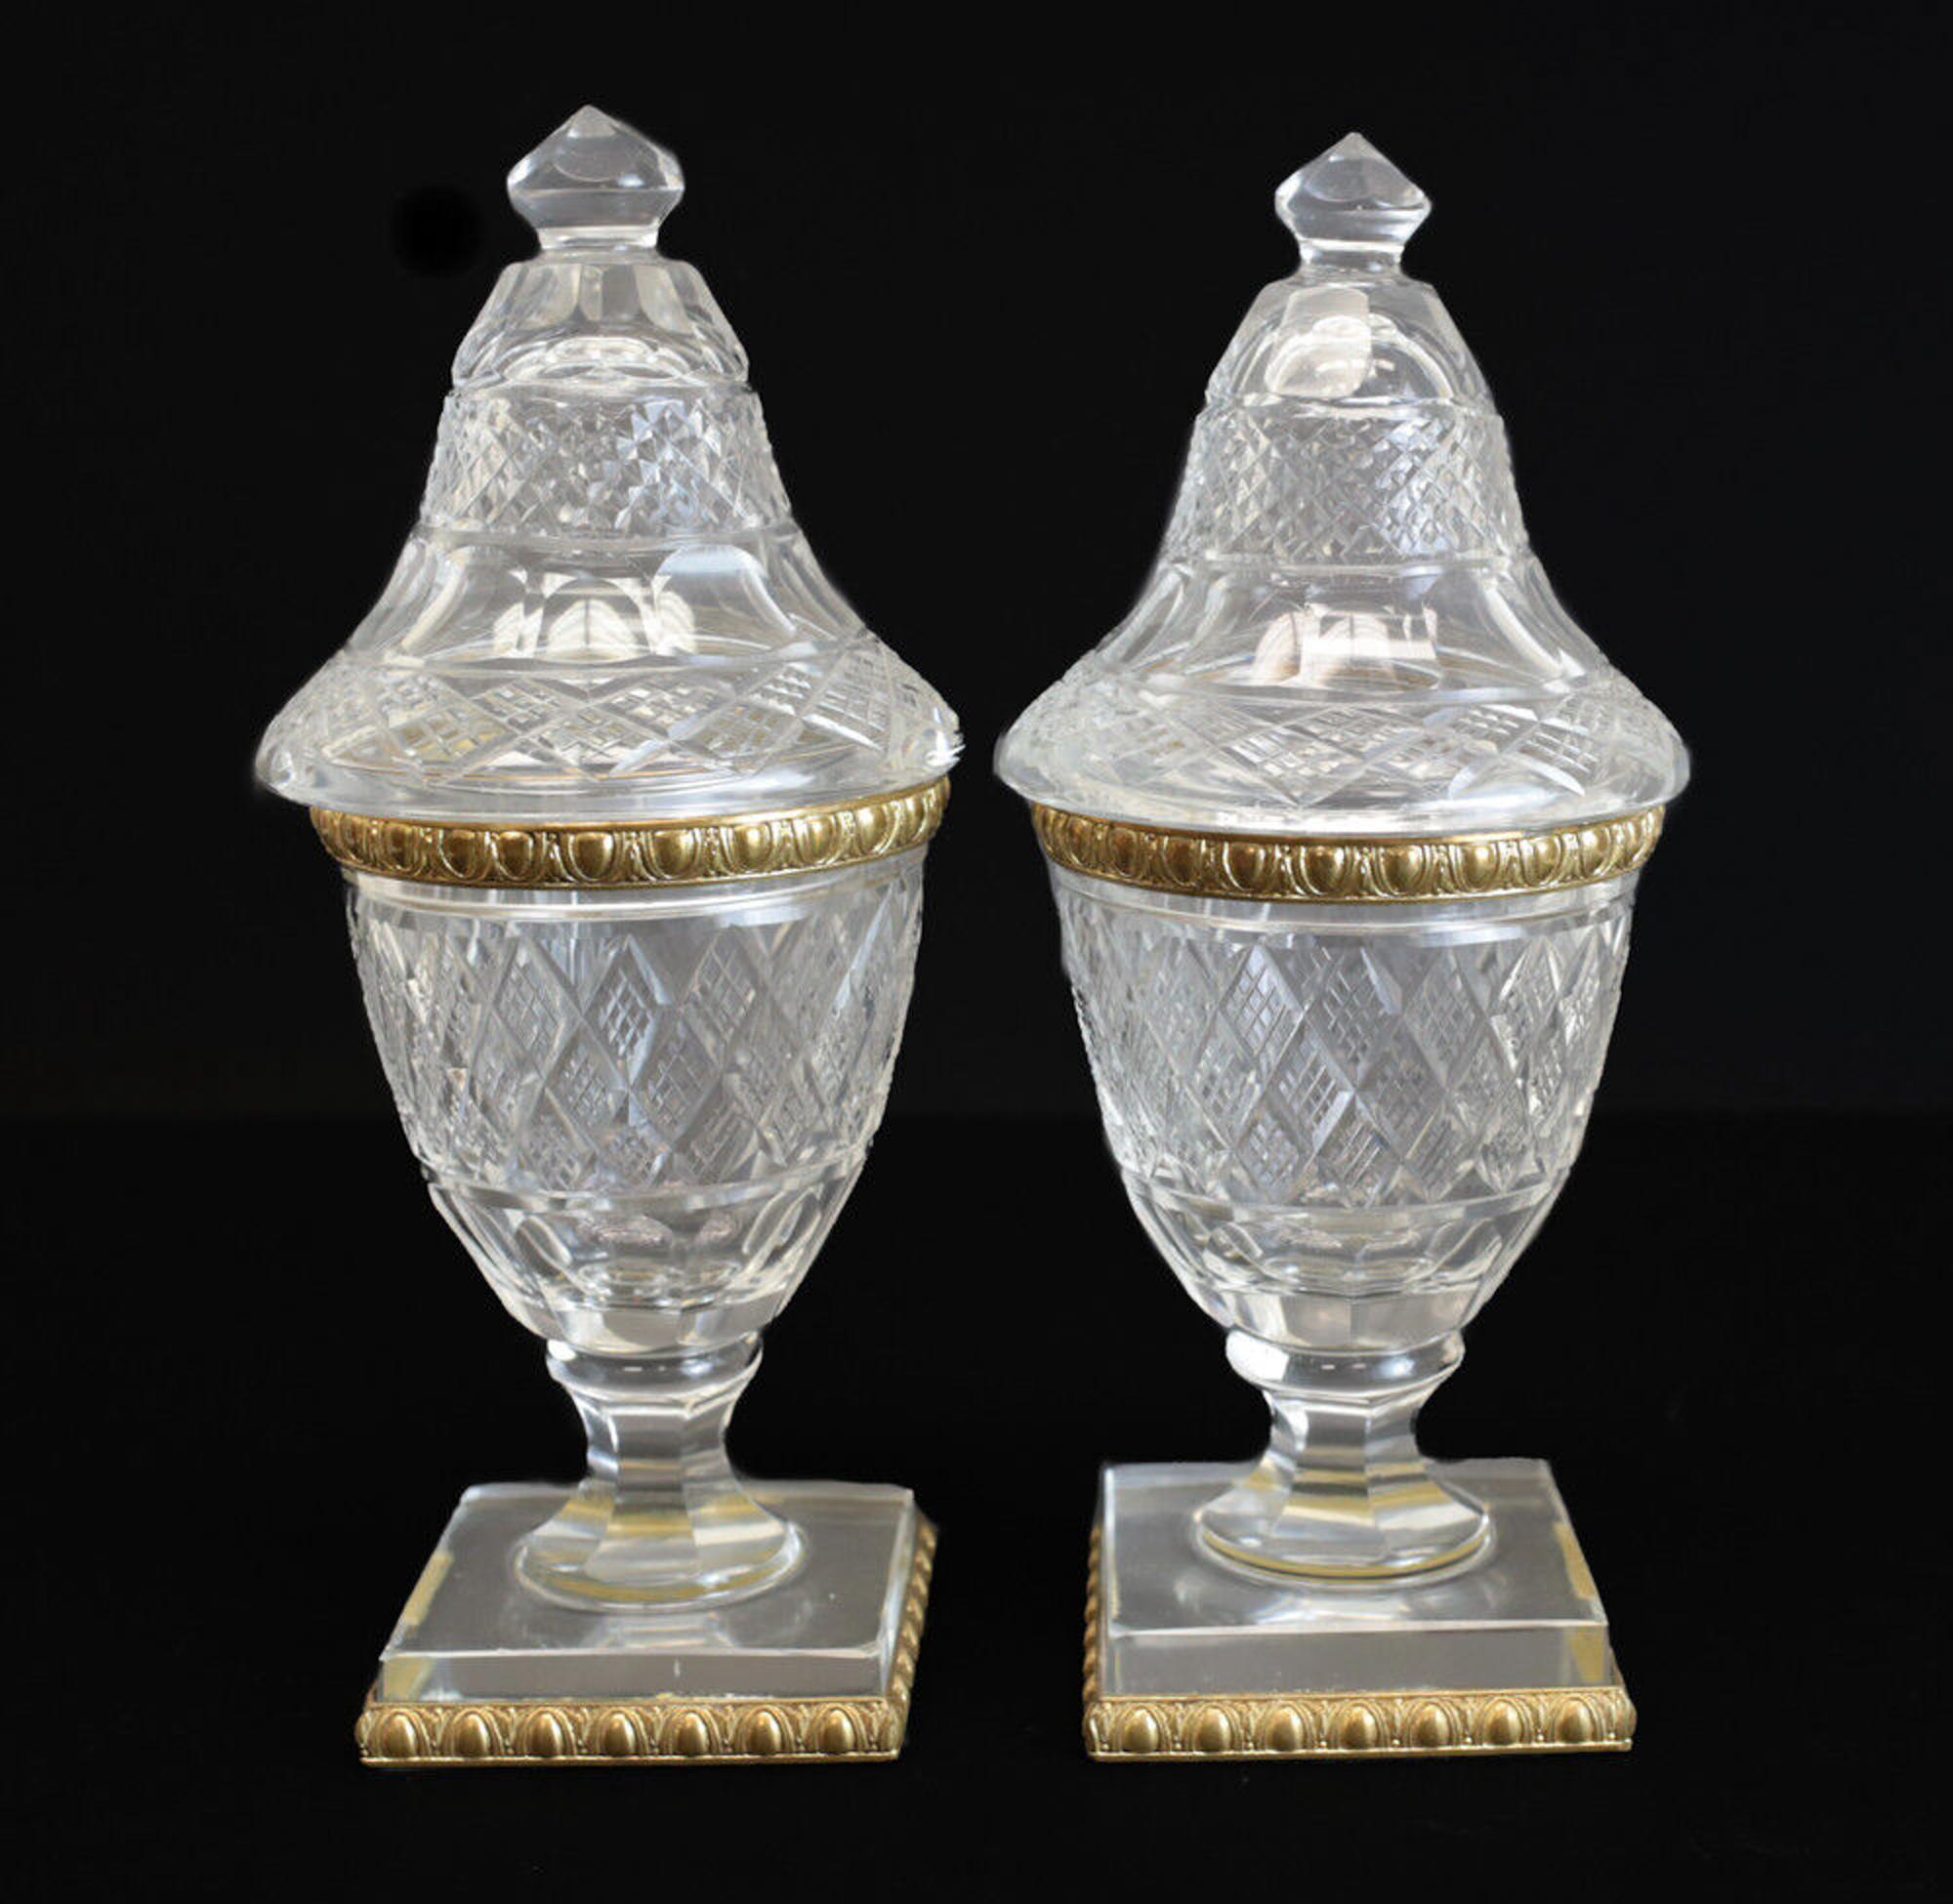 Fine Pair of French cut crystal & gilt bronze vanity jars, circa 1900

Cut crystal crosshatch diamond designs to throughout the glass. Gilt bronze to the circular bands and base.

Additional Information:
Item Width: 4 inches 
Item Length: 4